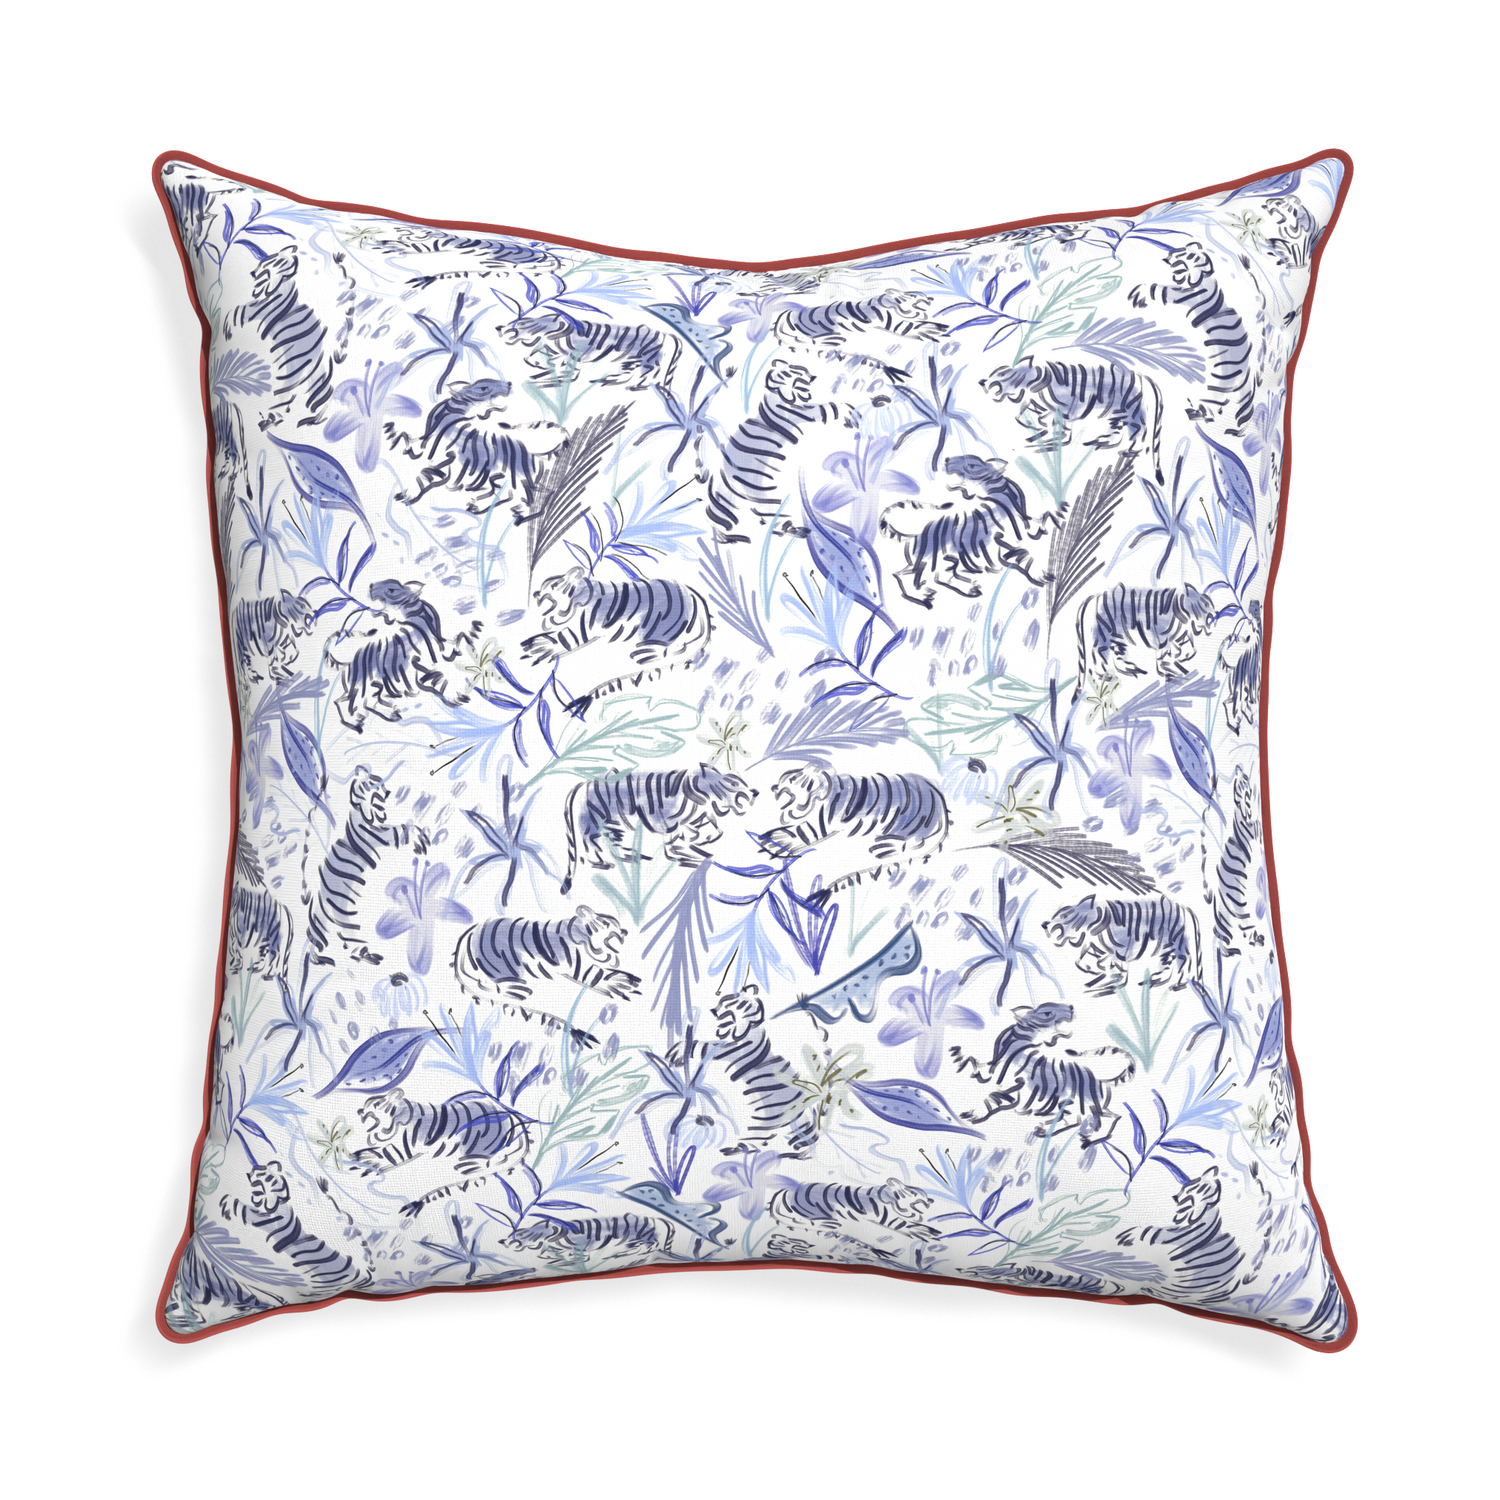 Euro-sham frida blue custom blue with intricate tiger designpillow with c piping on white background